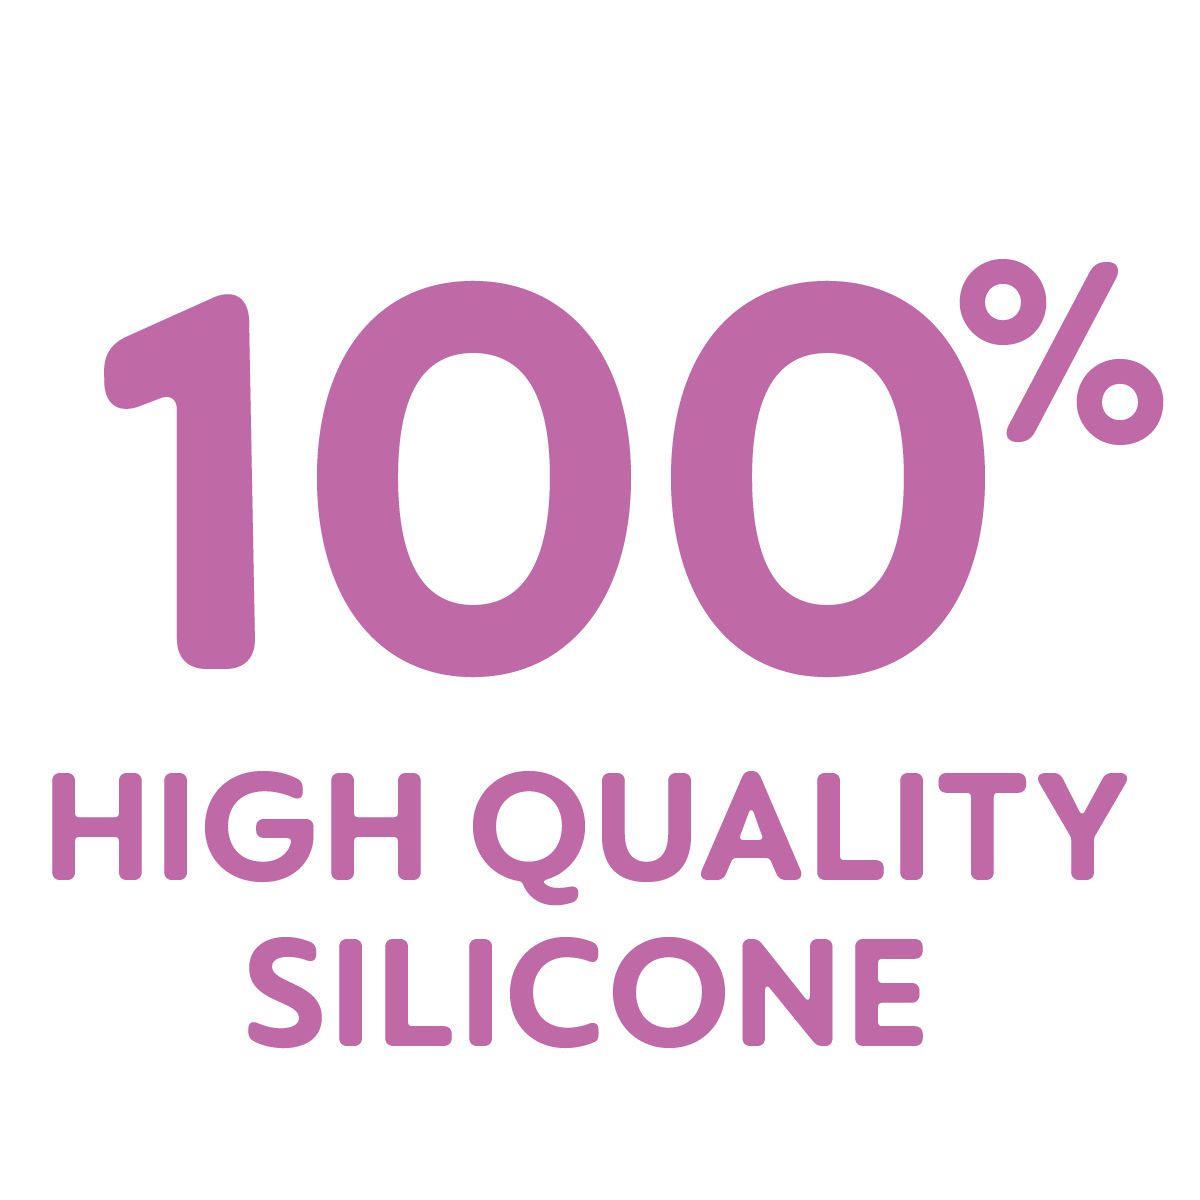 This product is made of 100% high-quality silicone - particularly hygienic, durable and safe